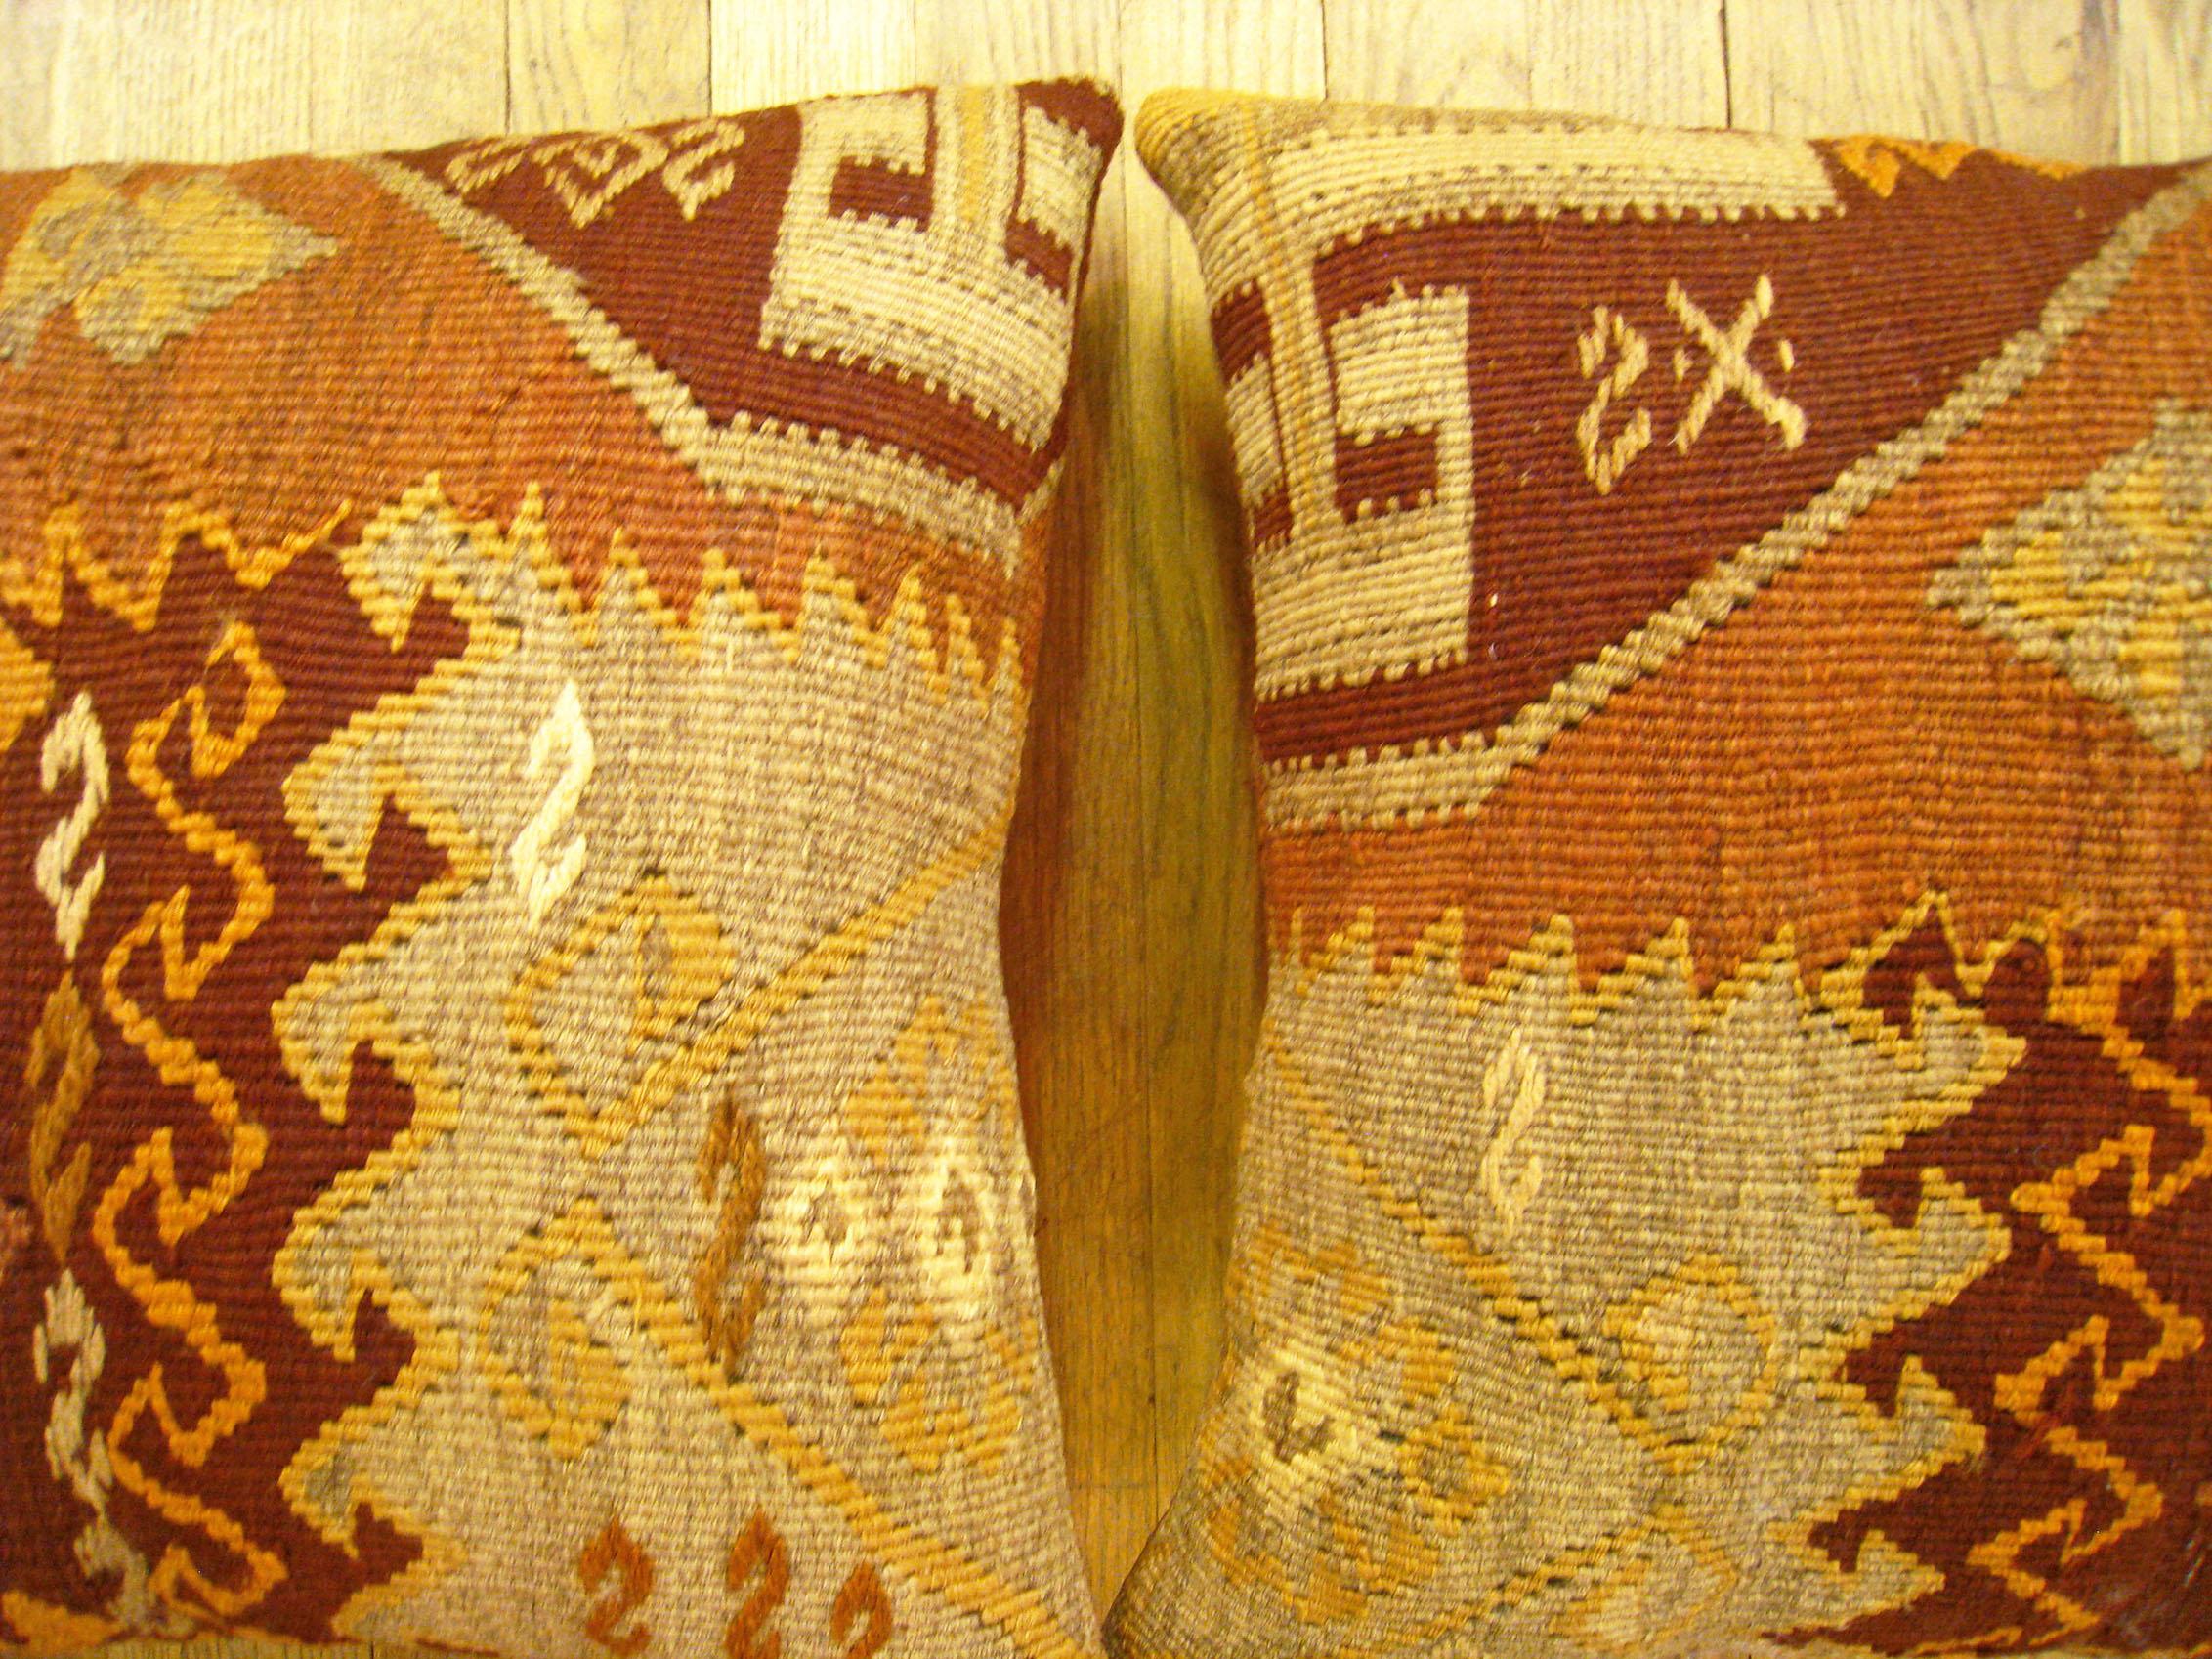 Pair of Decorative Vintage Turkish Kilim Rug Pillows with Geometric Abstracts In Good Condition For Sale In New York, NY